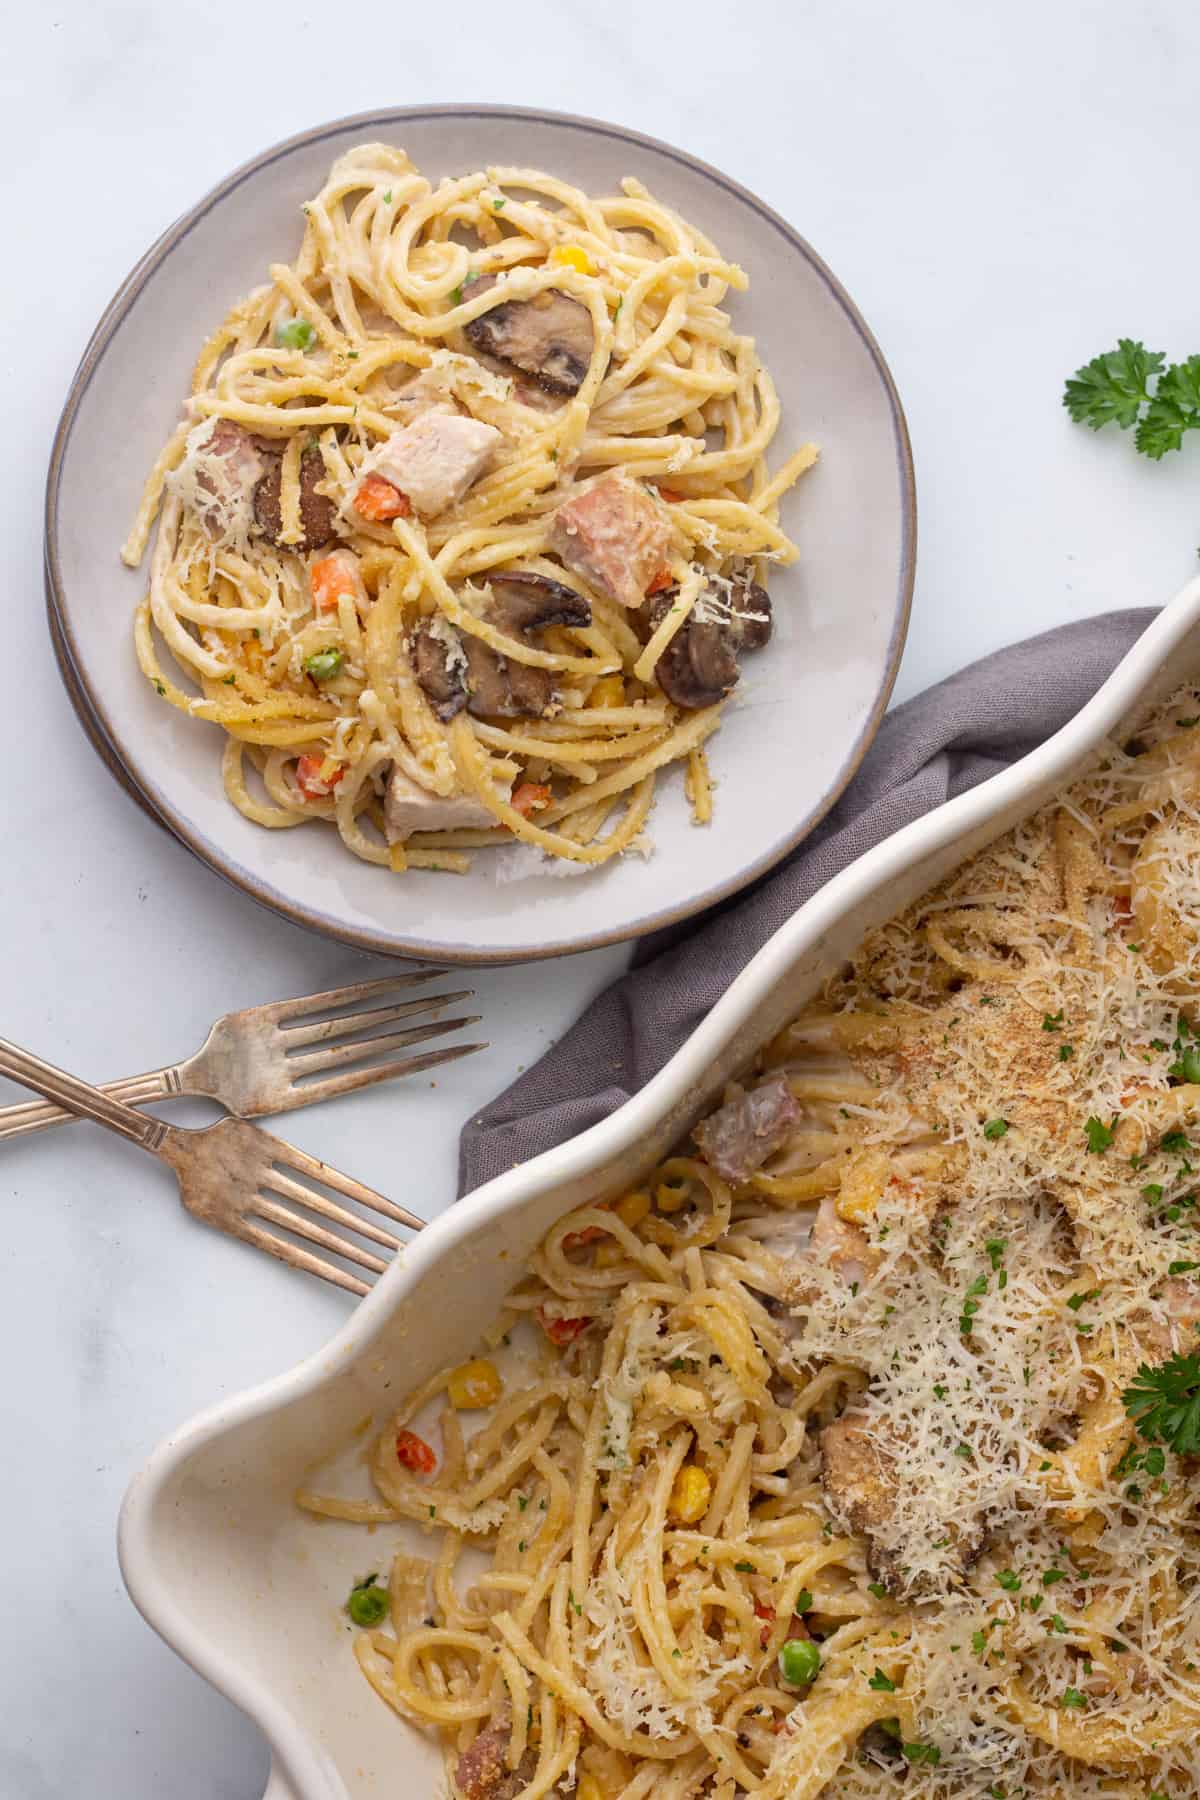 A casserole dish with pasta, turkey and parsley.